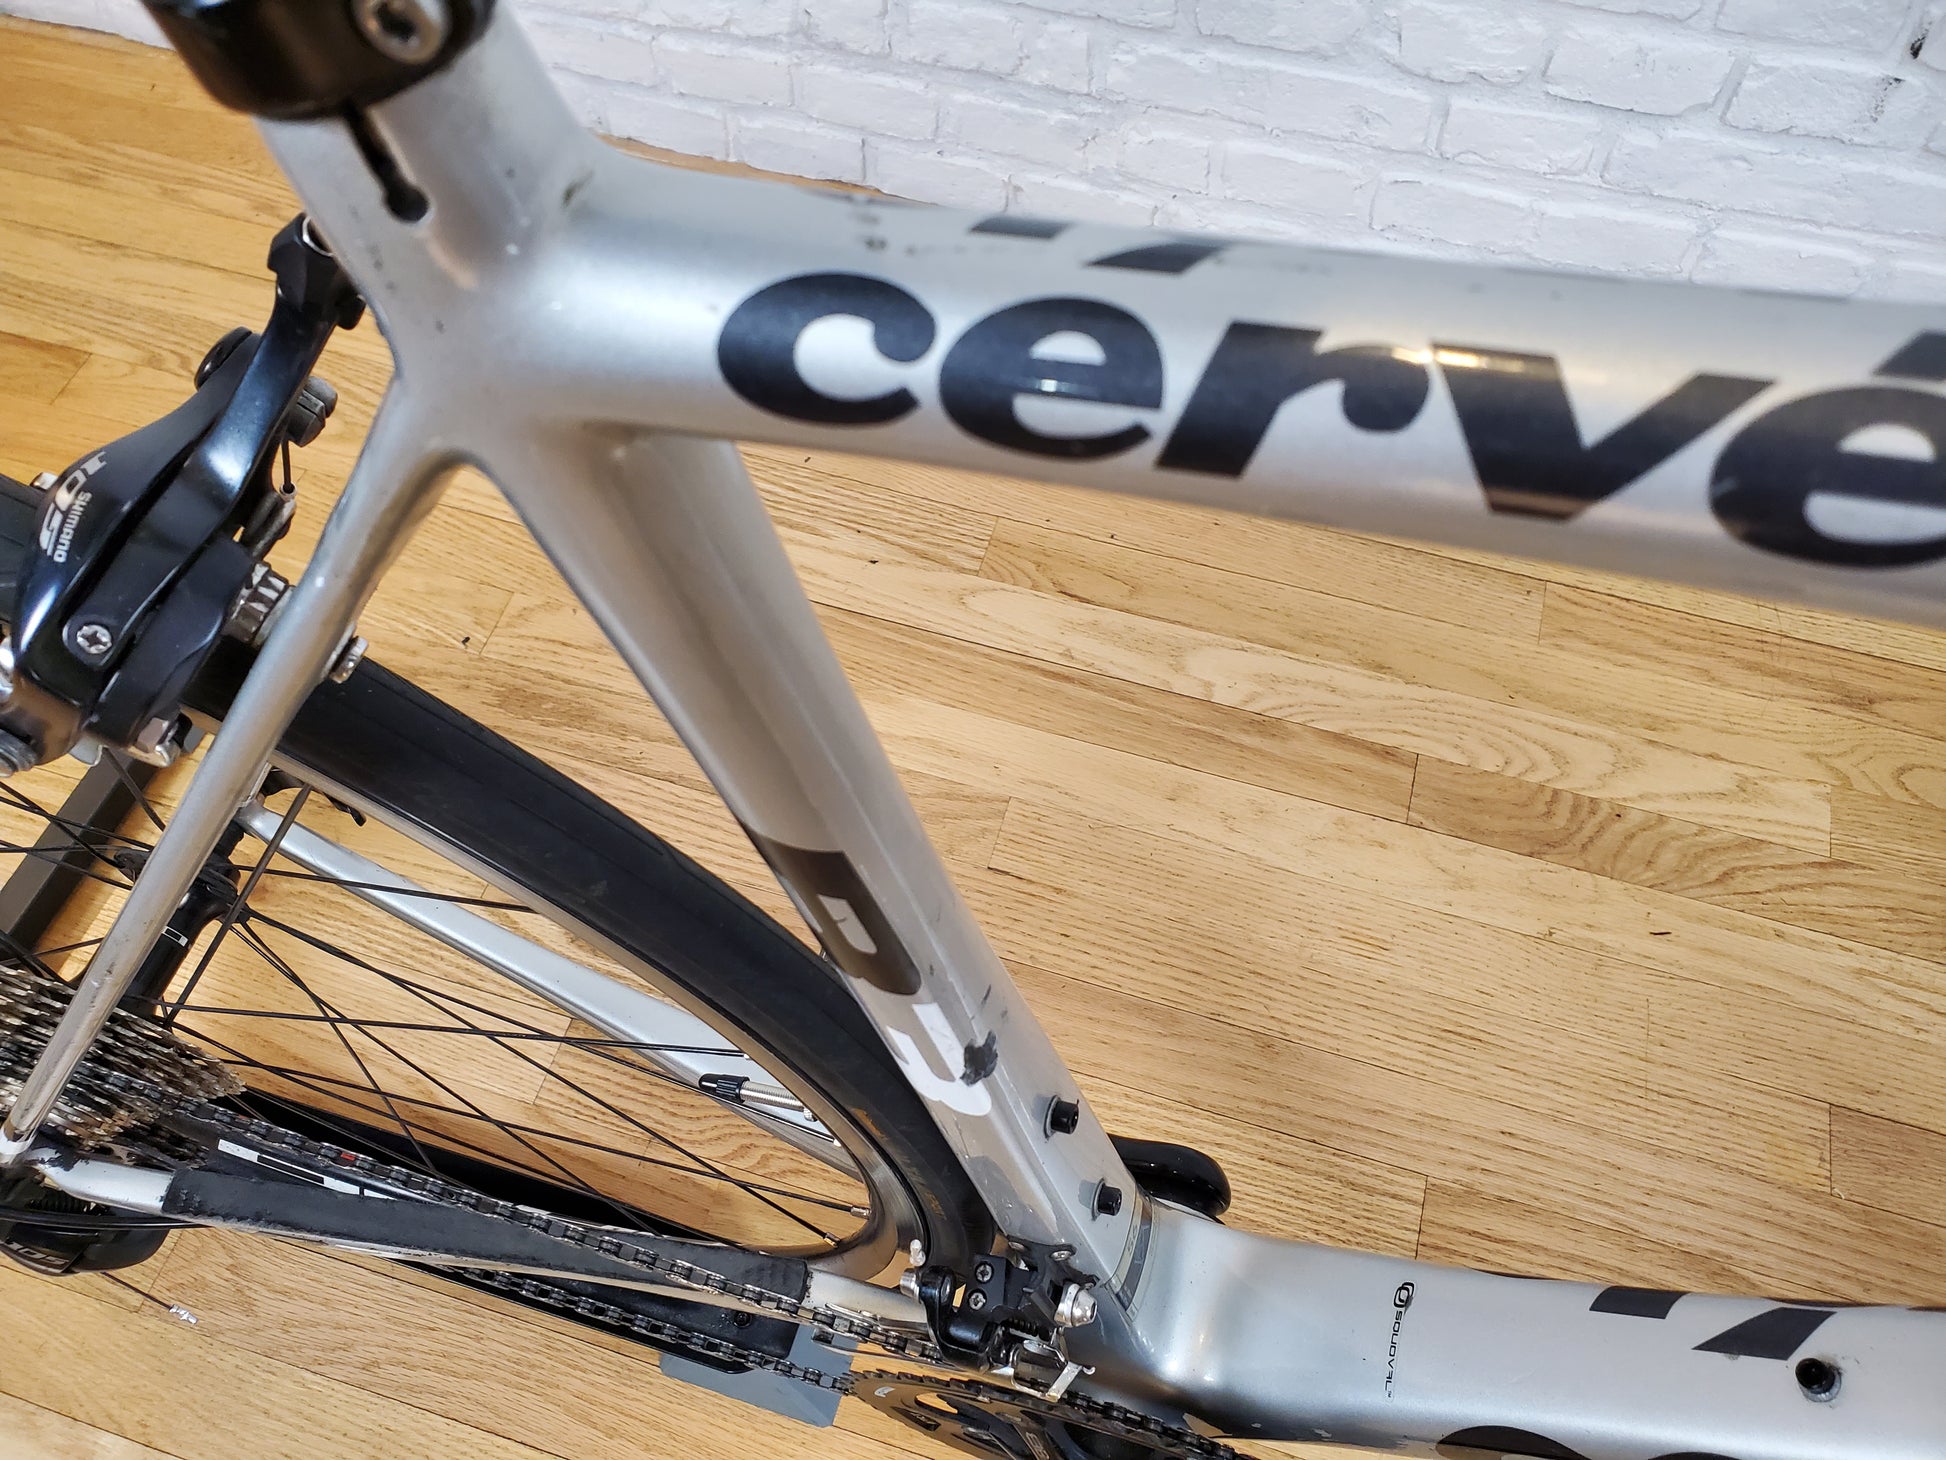 Cosmetic blemishes on Cervelo R3 road bike frame (see pics)